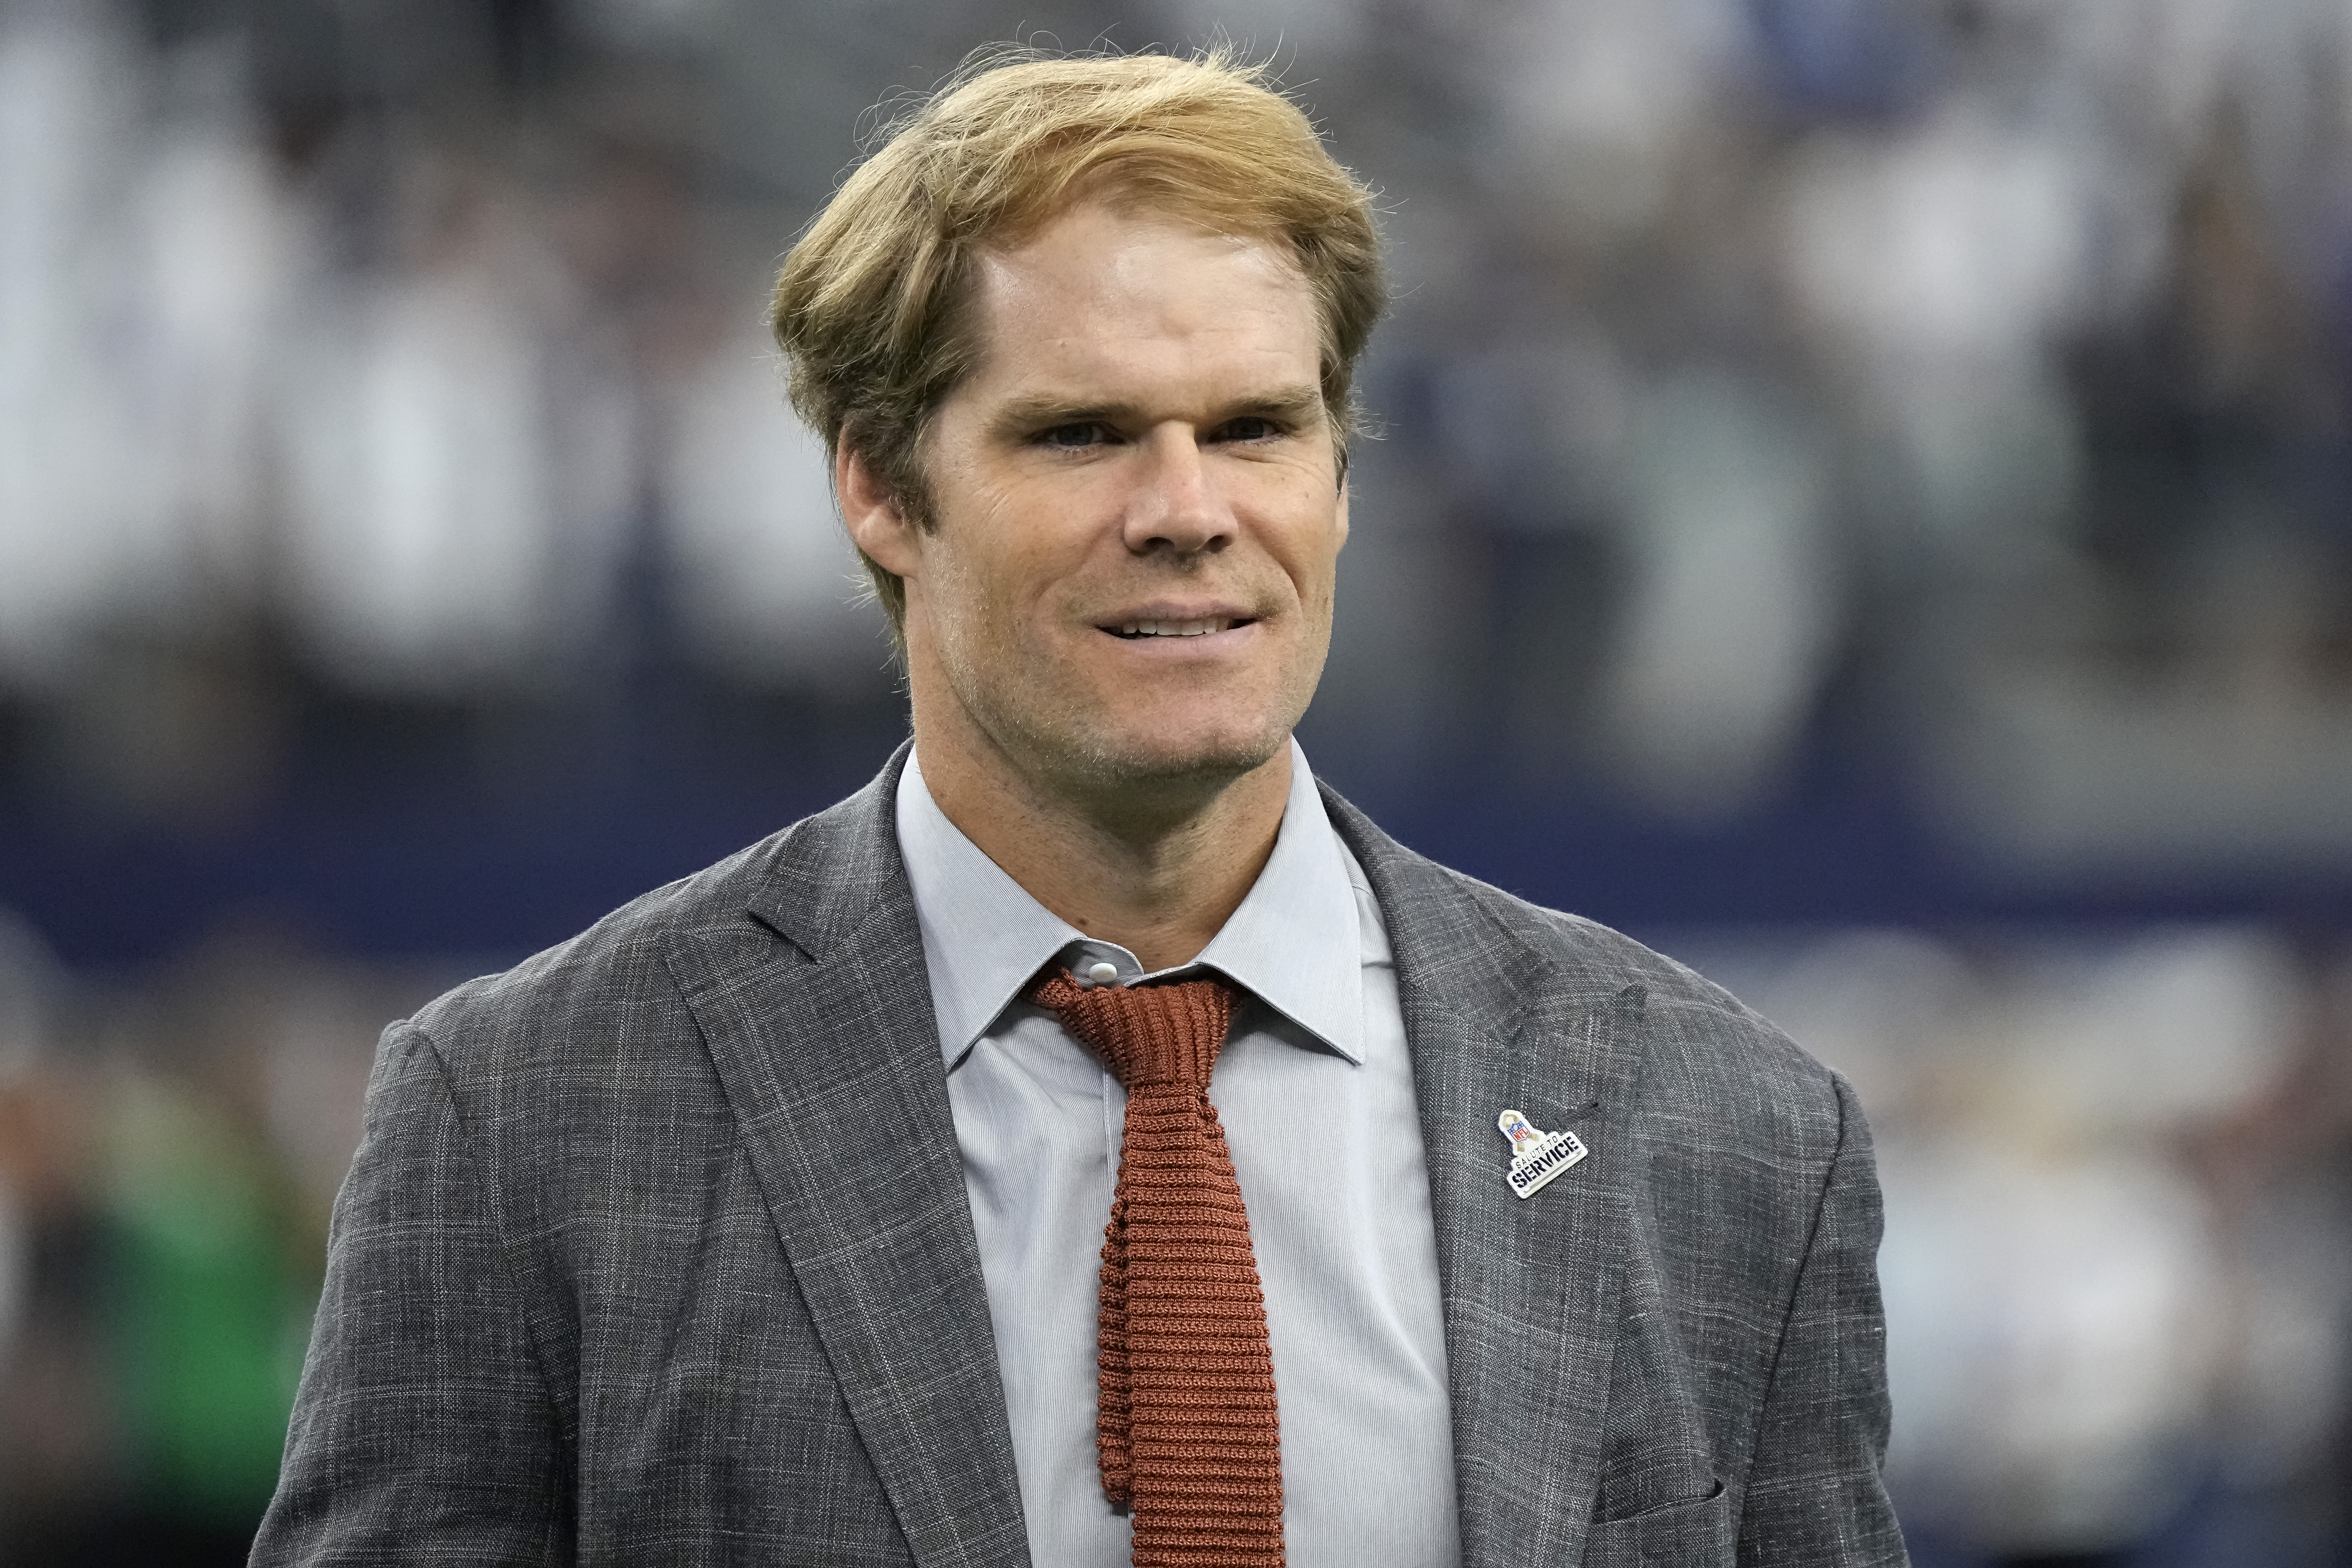 Fox's Greg Olsen wins Emmy for best NFL analyst right before getting replaced by Tom Brady